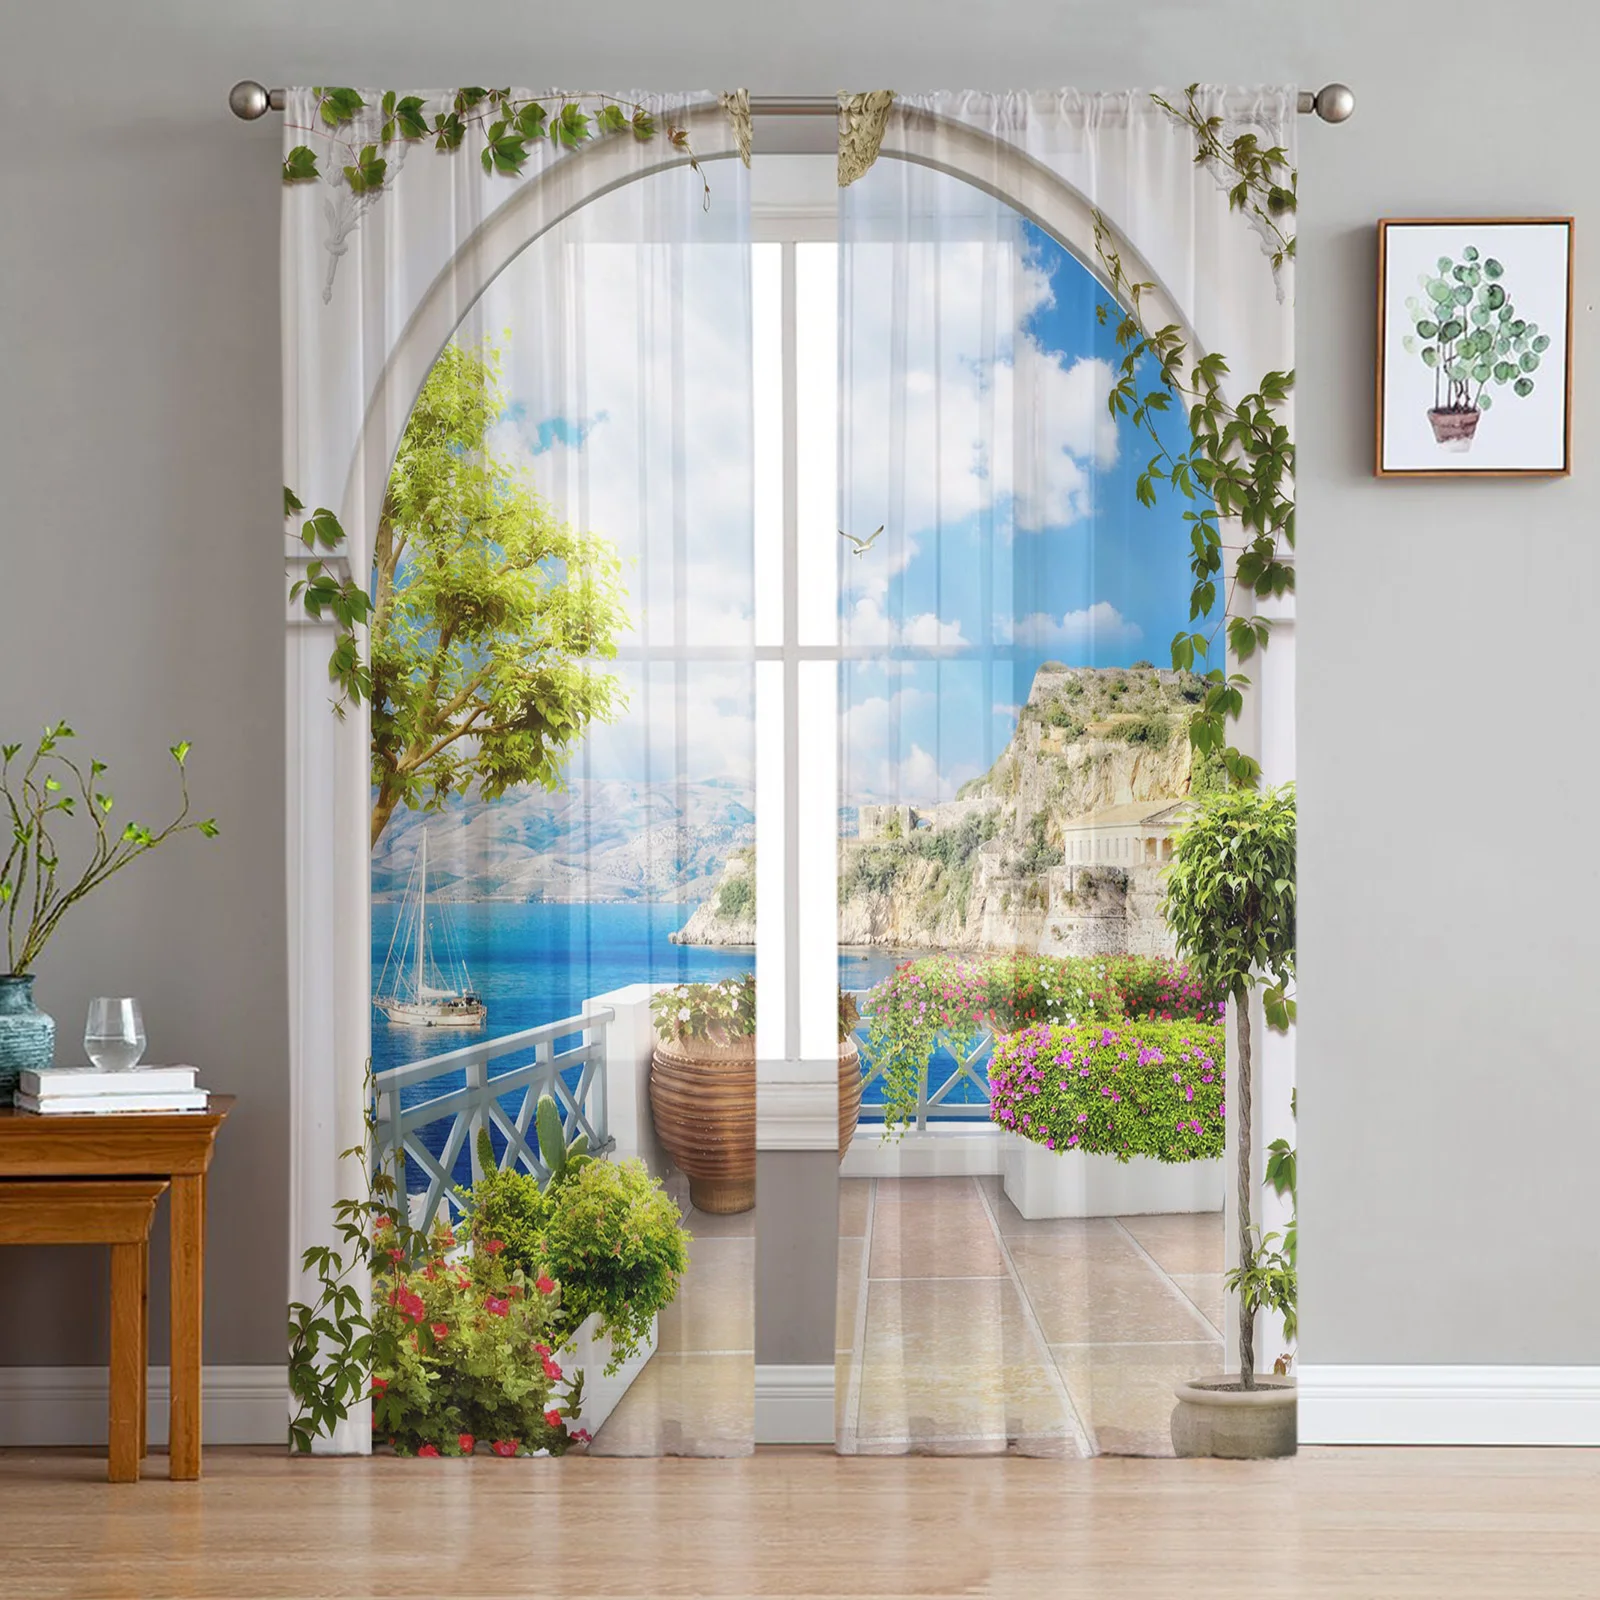 Garden Building Seaside Flowers Tulle Sheer Window Curtains for Living Room the Bedroom Modern Voile Organza Curtains Drapes